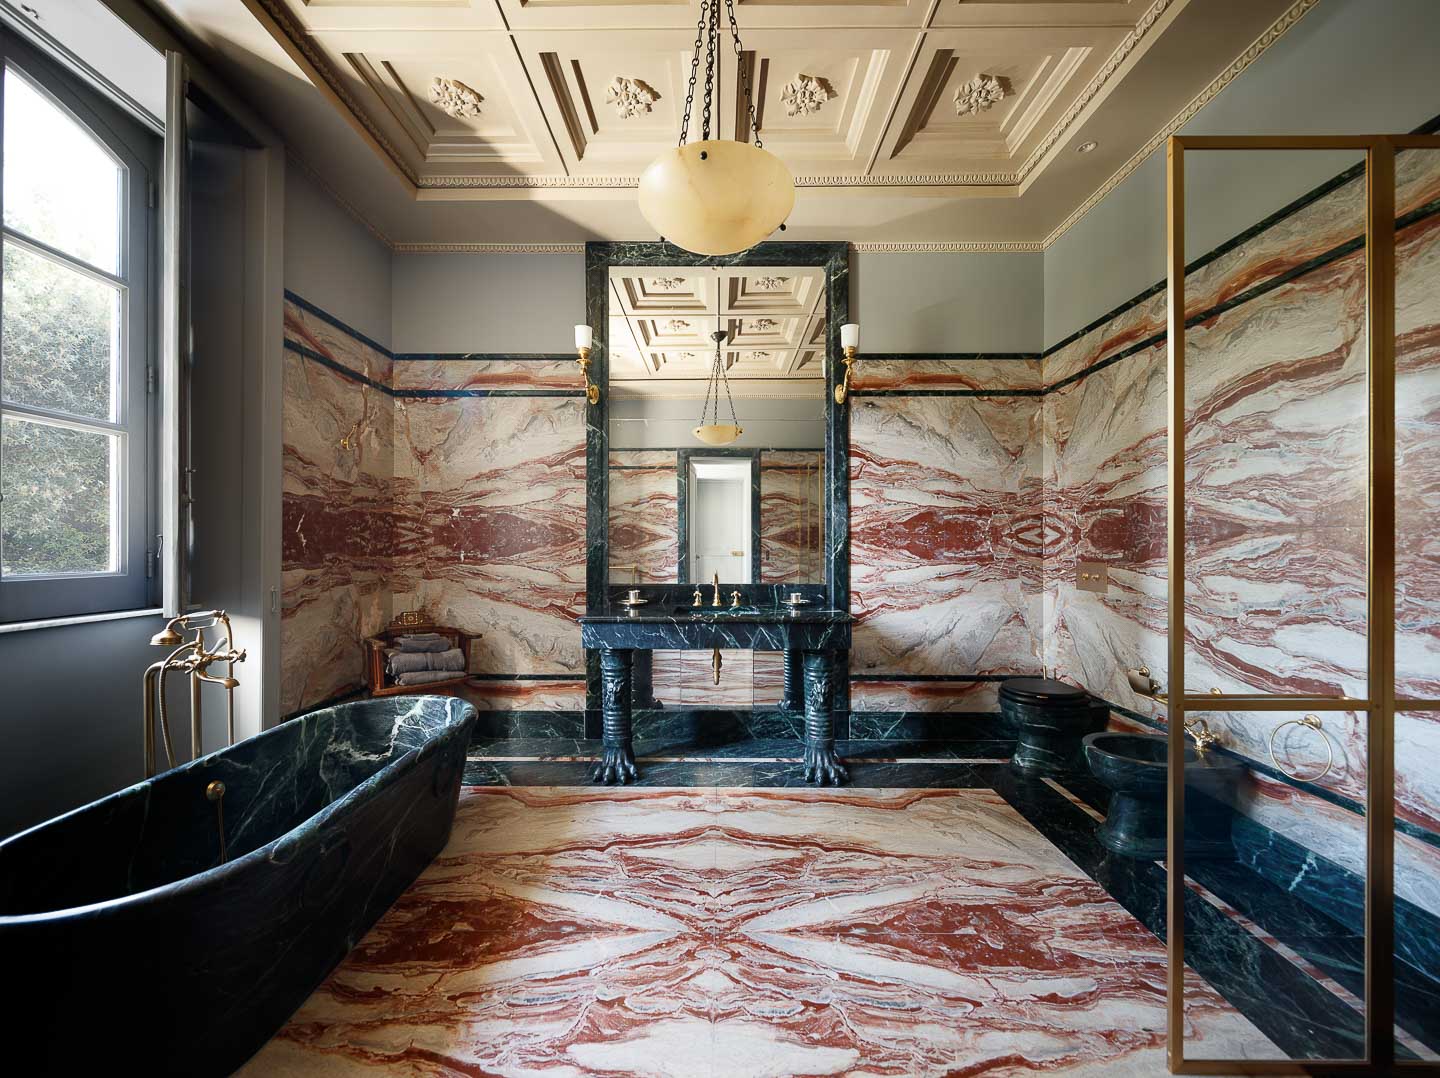 Villa Astor exclusive bathroom bathtub rare marble decor decoration interior French interiordesigner Jacues Garcia luxury travel experience guest holiday vacation stay bedrooms The Heritage Collection